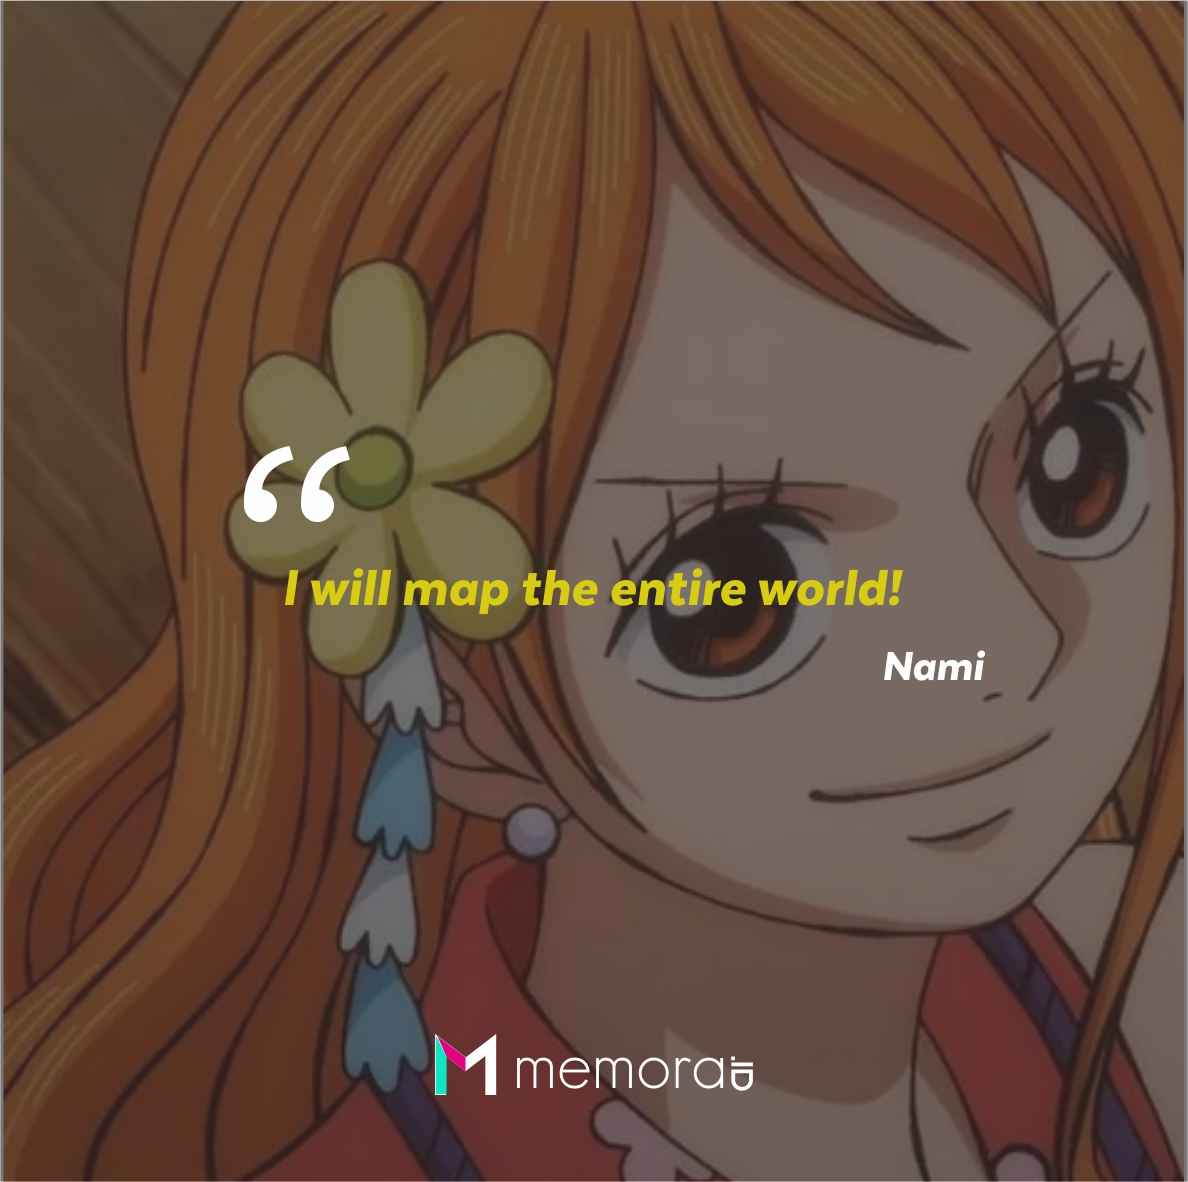 Quotes from Nami in One Piece